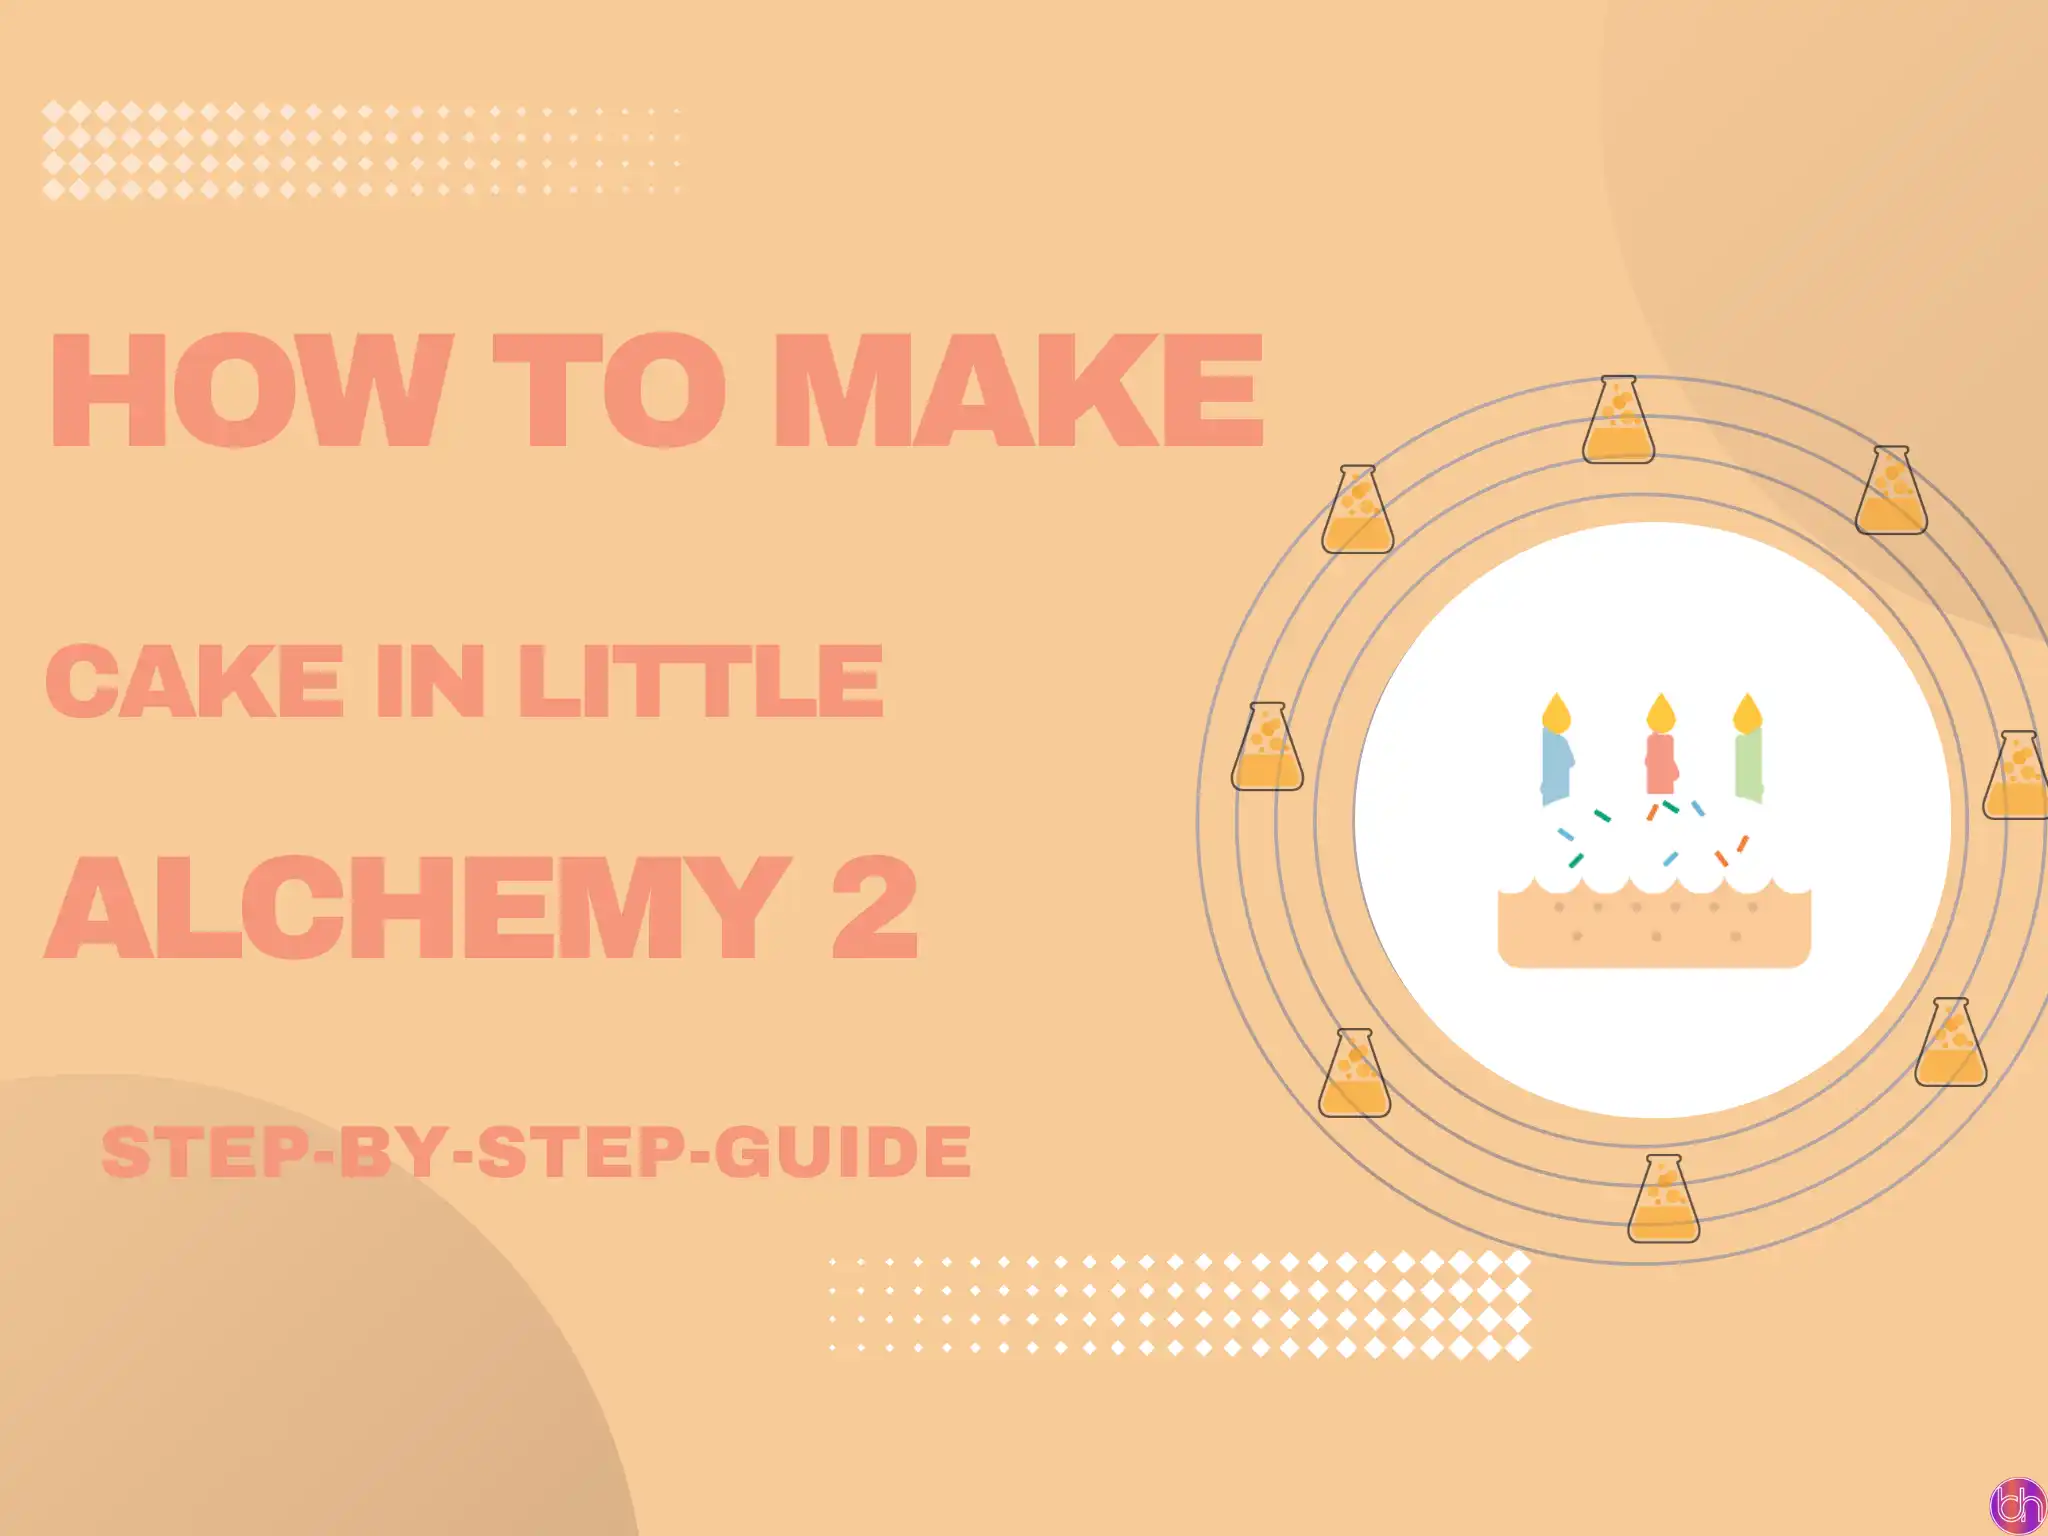 How to make Cake in Little Alchemy 2